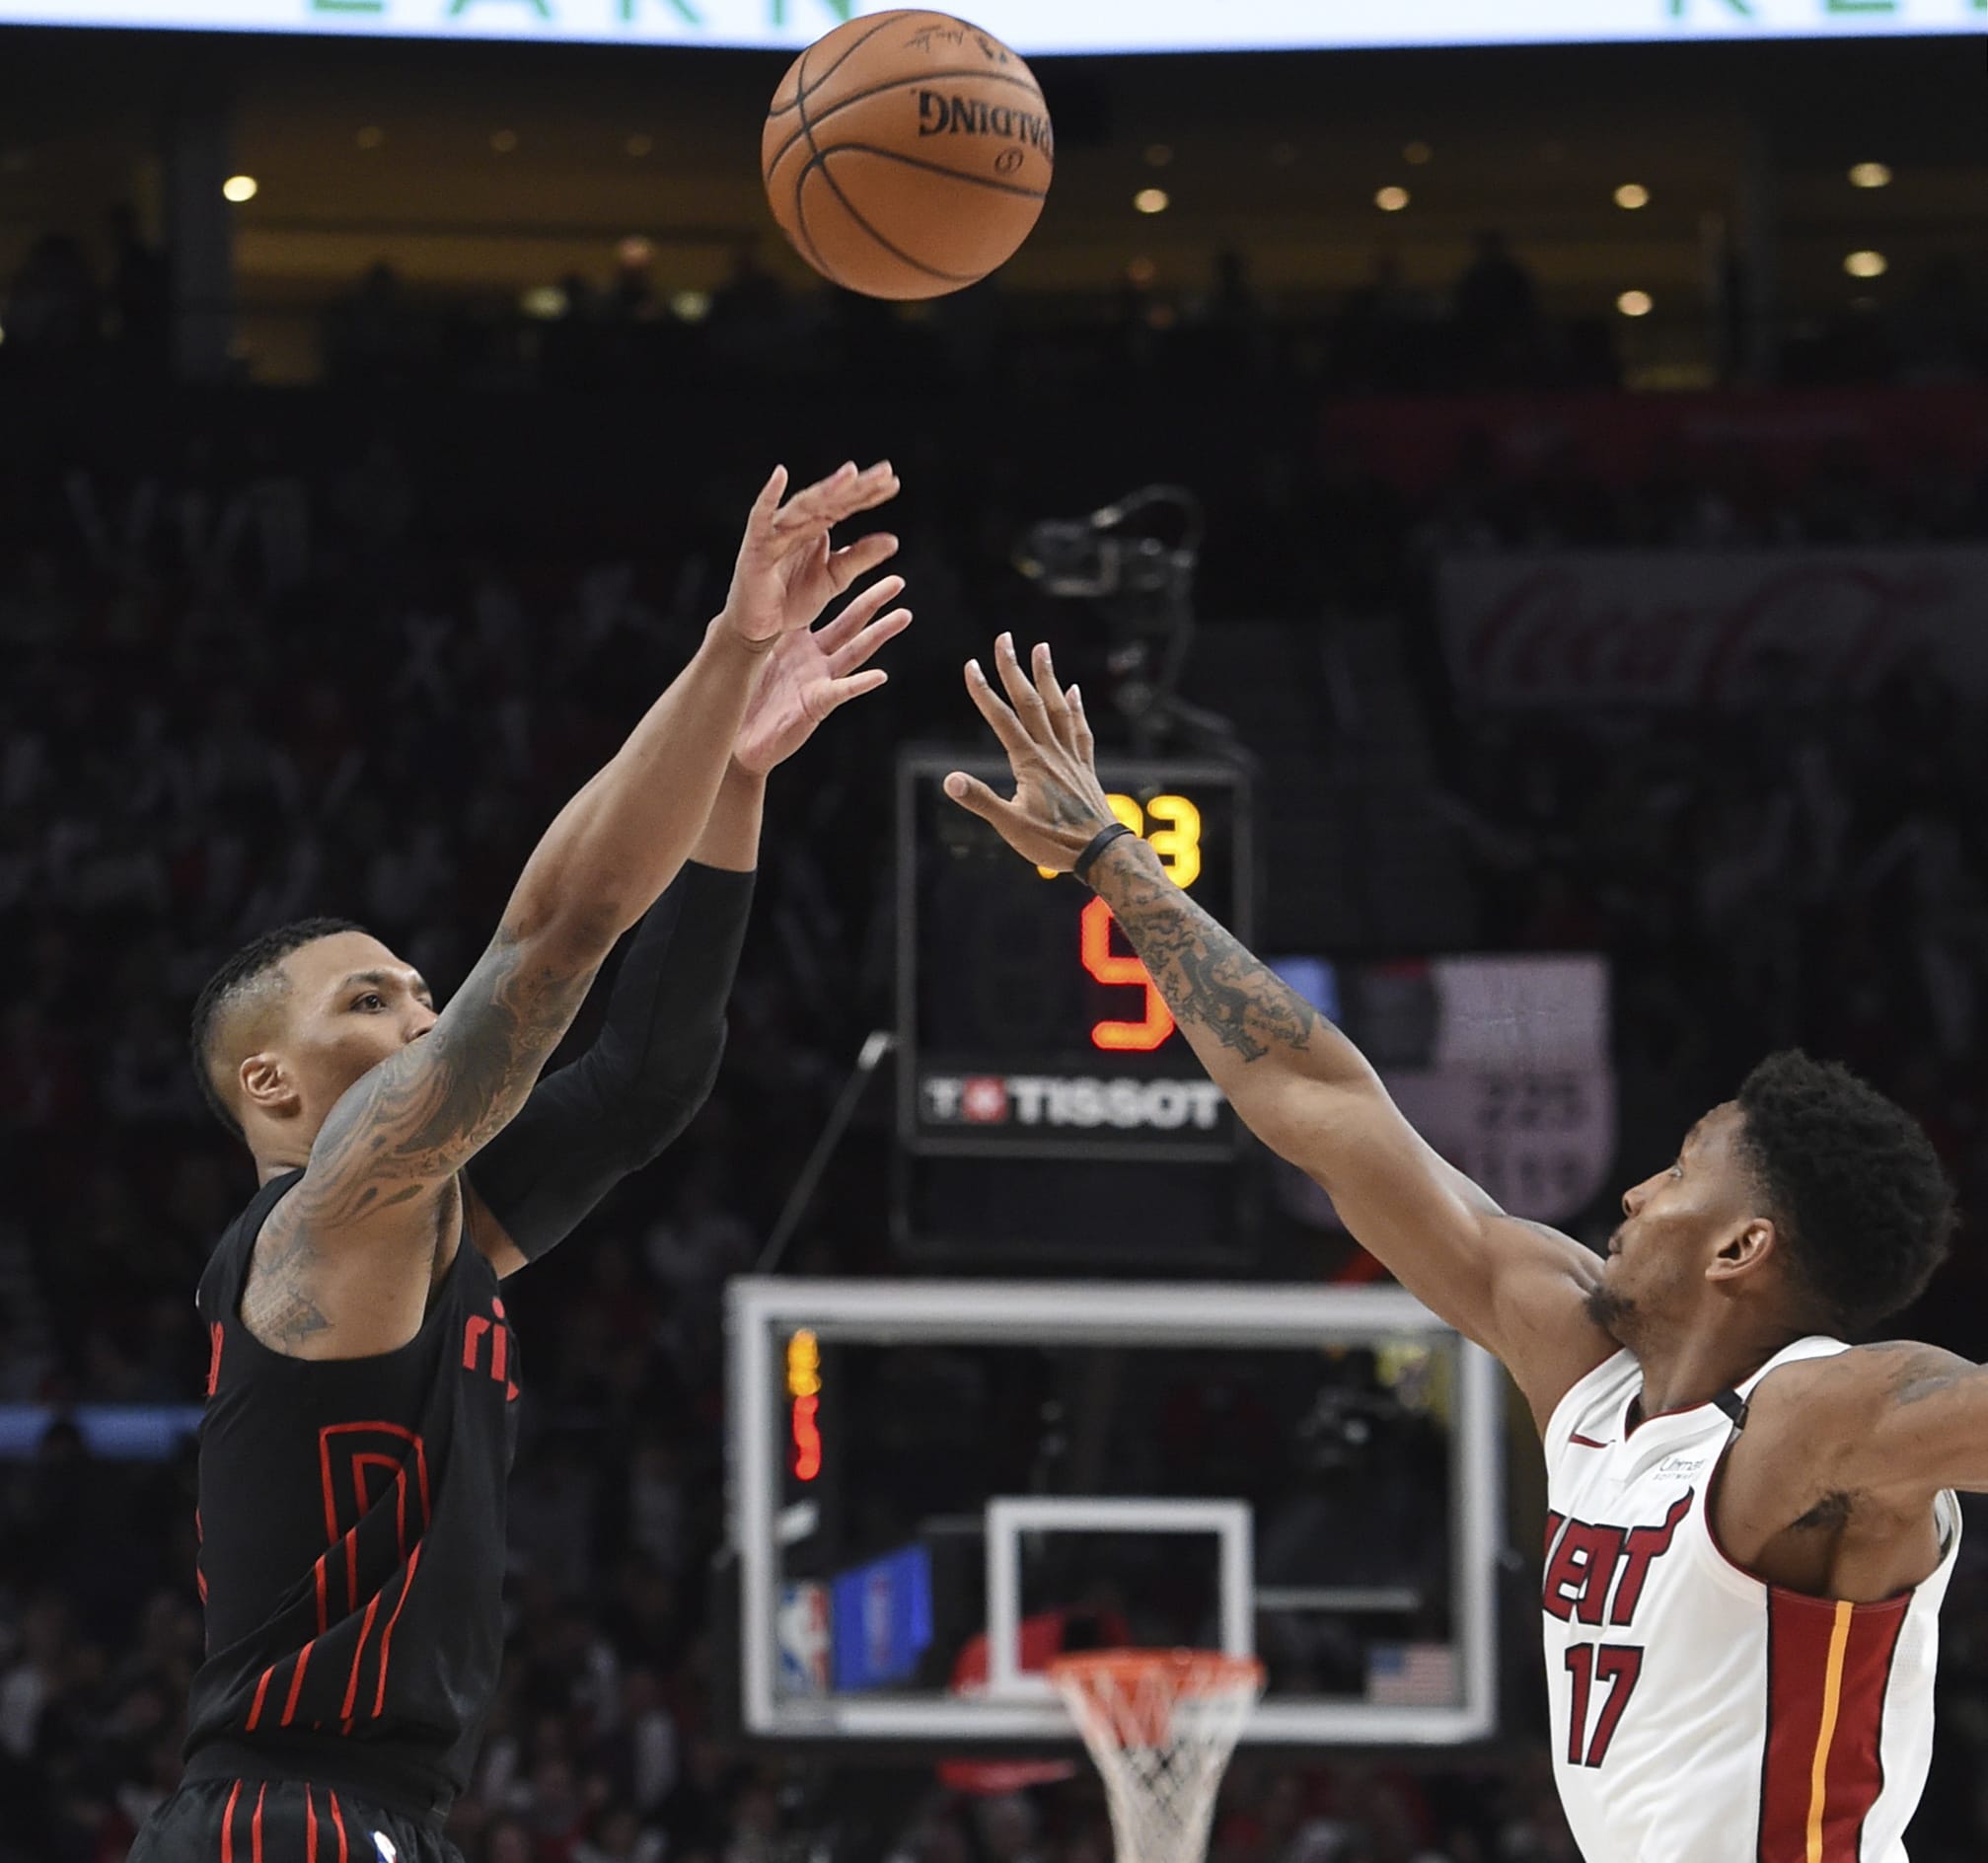 Portland Trail Blazers guard Damian Lillard hits a 3-point shot over Miami Heat guard Rodney McGruder during the second half of an NBA basketball game in Portland, Ore., Monday, March 12, 2018. The Blazers won 115-99.